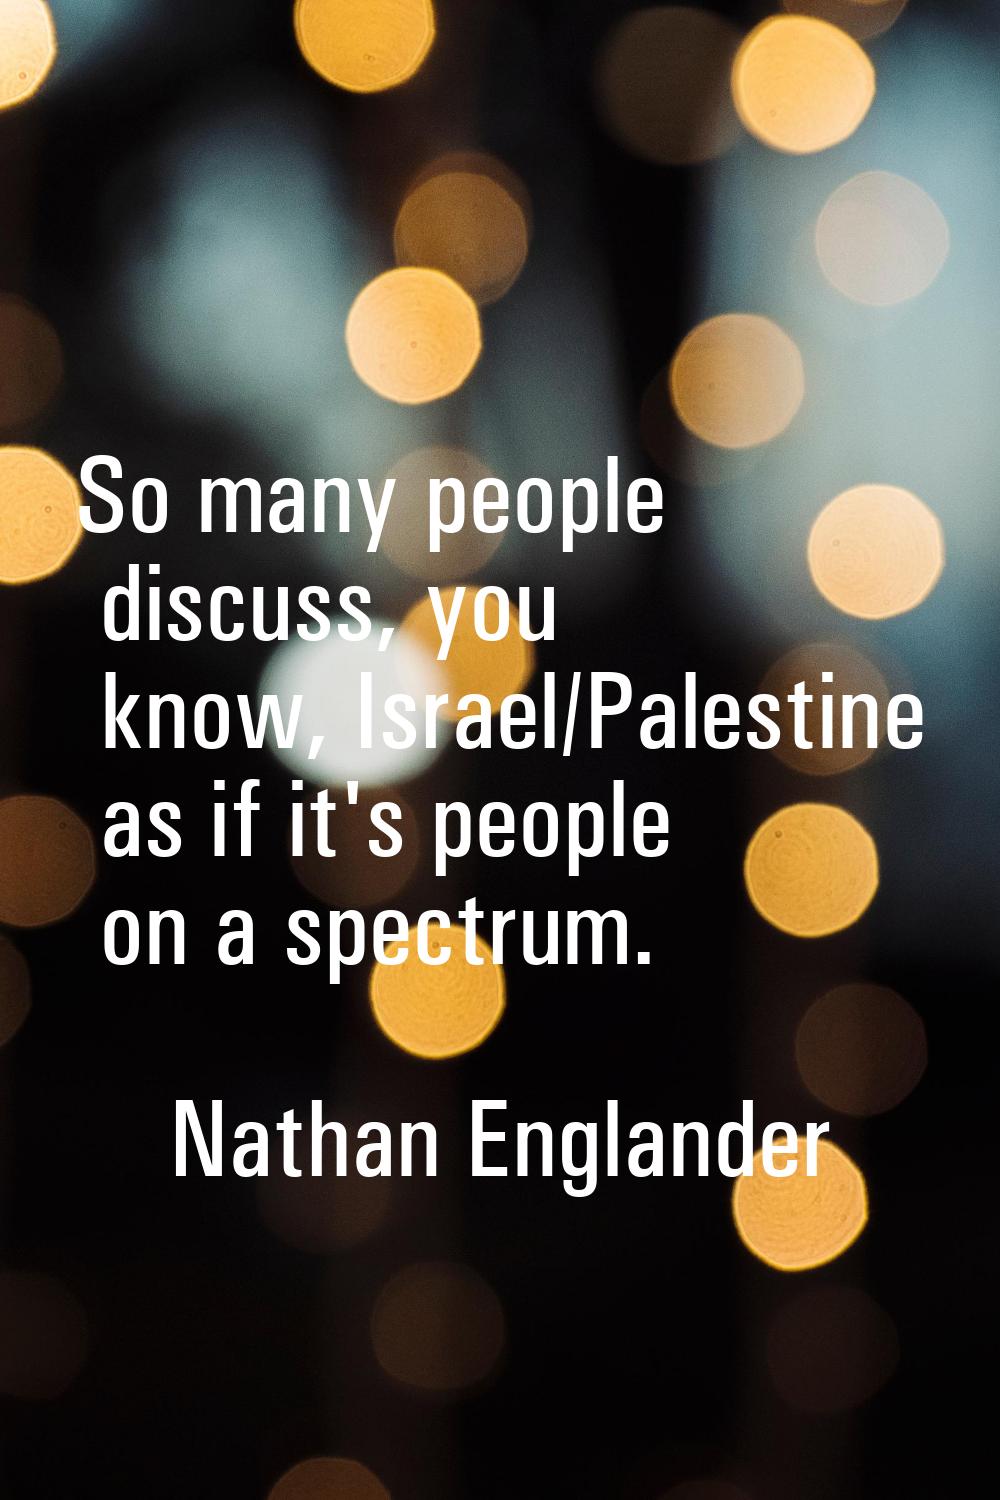 So many people discuss, you know, Israel/Palestine as if it's people on a spectrum.